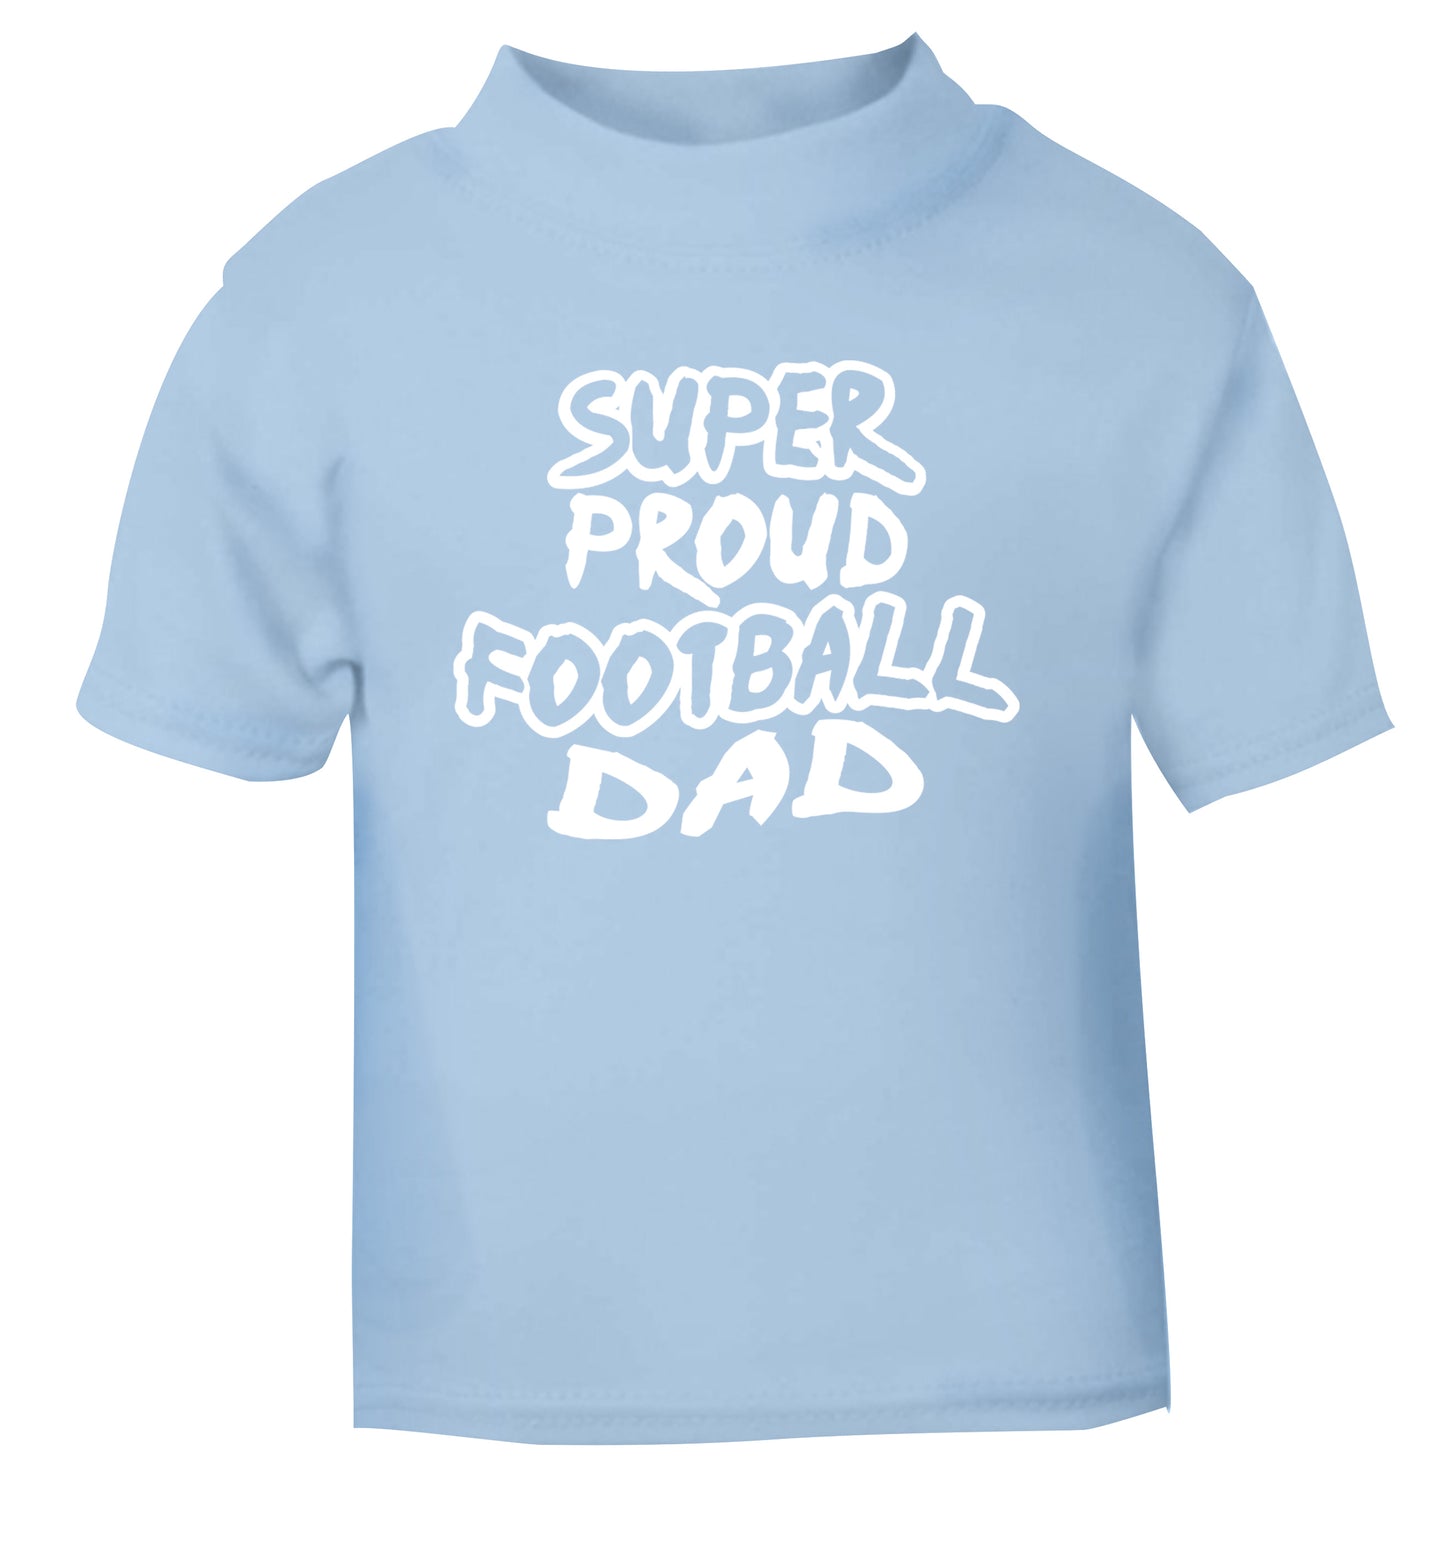 Super proud football dad light blue Baby Toddler Tshirt 2 Years